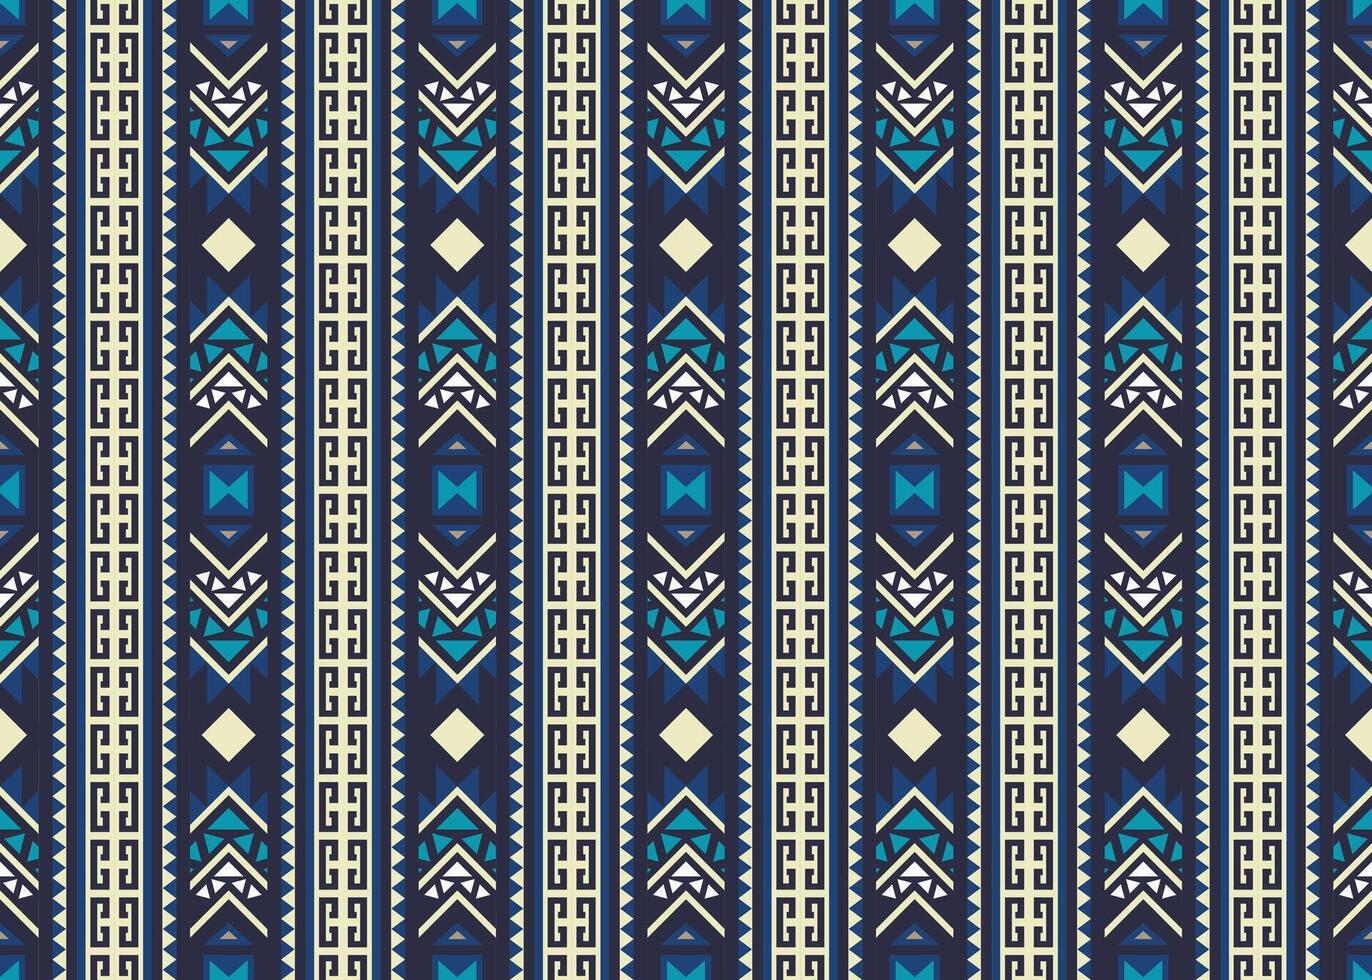 Aztec tribal geometric ethnic seamless pattern. Vintage Native American African Mexican. Ethnic oriental vector background. Traditional ornament. Design textile, fabric, clothing, curtain, wrapping.